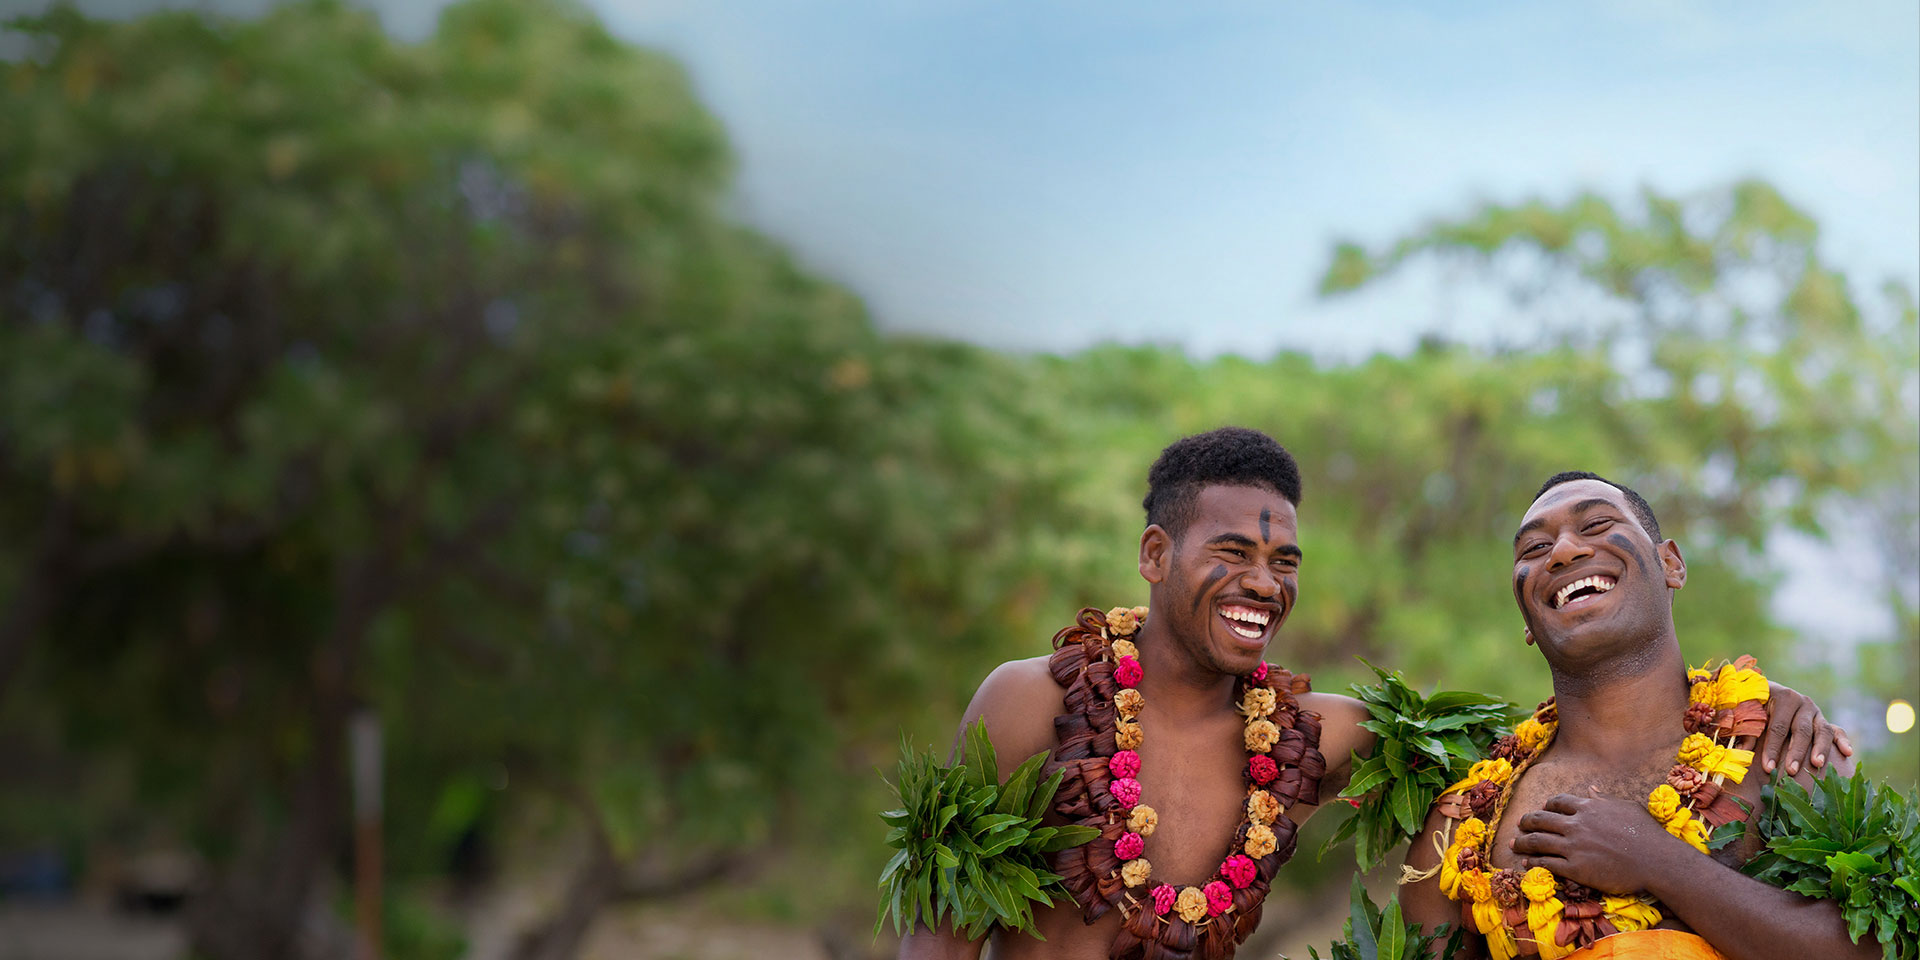 Find Your Bula in Fiji | The Official Travel Site of the Fiji Islands